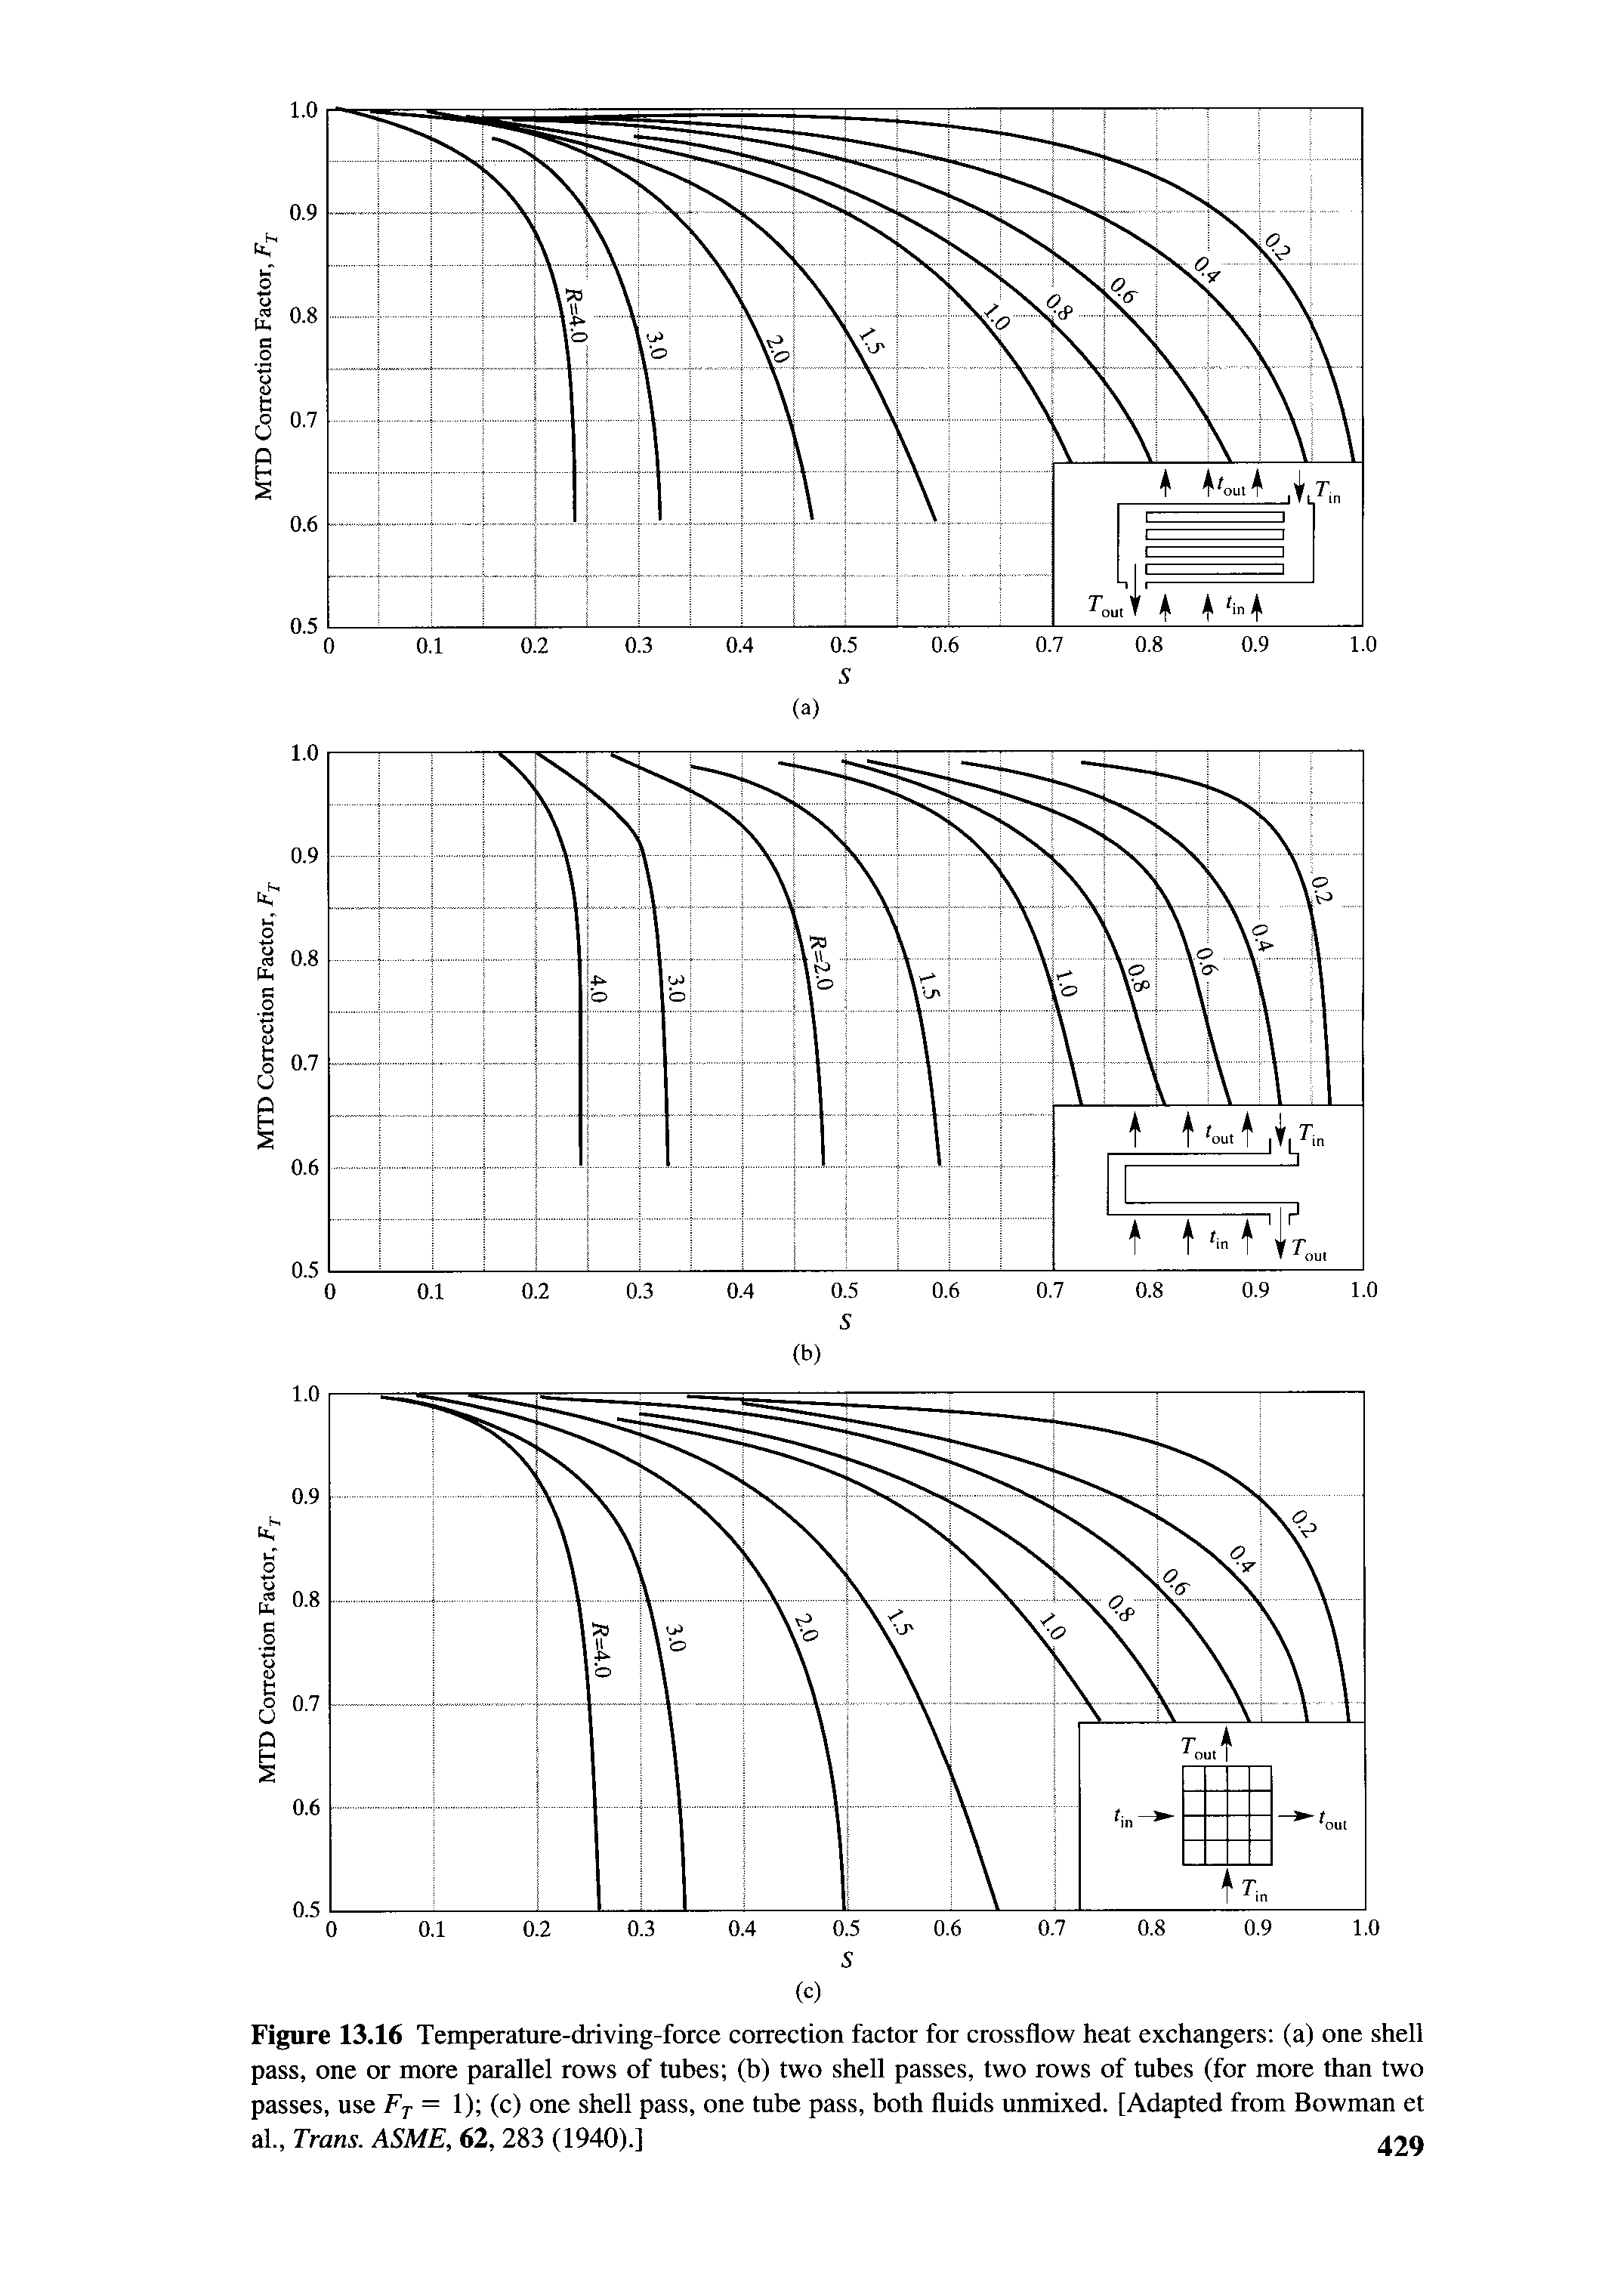 Figure 13.16 Temperature-driving-force correction factor for crossflow heat exchangers (a) one shell pass, one or more parallel rows of tubes (b) two shell passes, two rows of tubes (for more than two passes, use Fj = 1) (c) one shell pass, one tube pass, both fluids unmixed. [Adapted from Bowman et al., Trans. ASME, 62, 283 (1940).] 42Q...